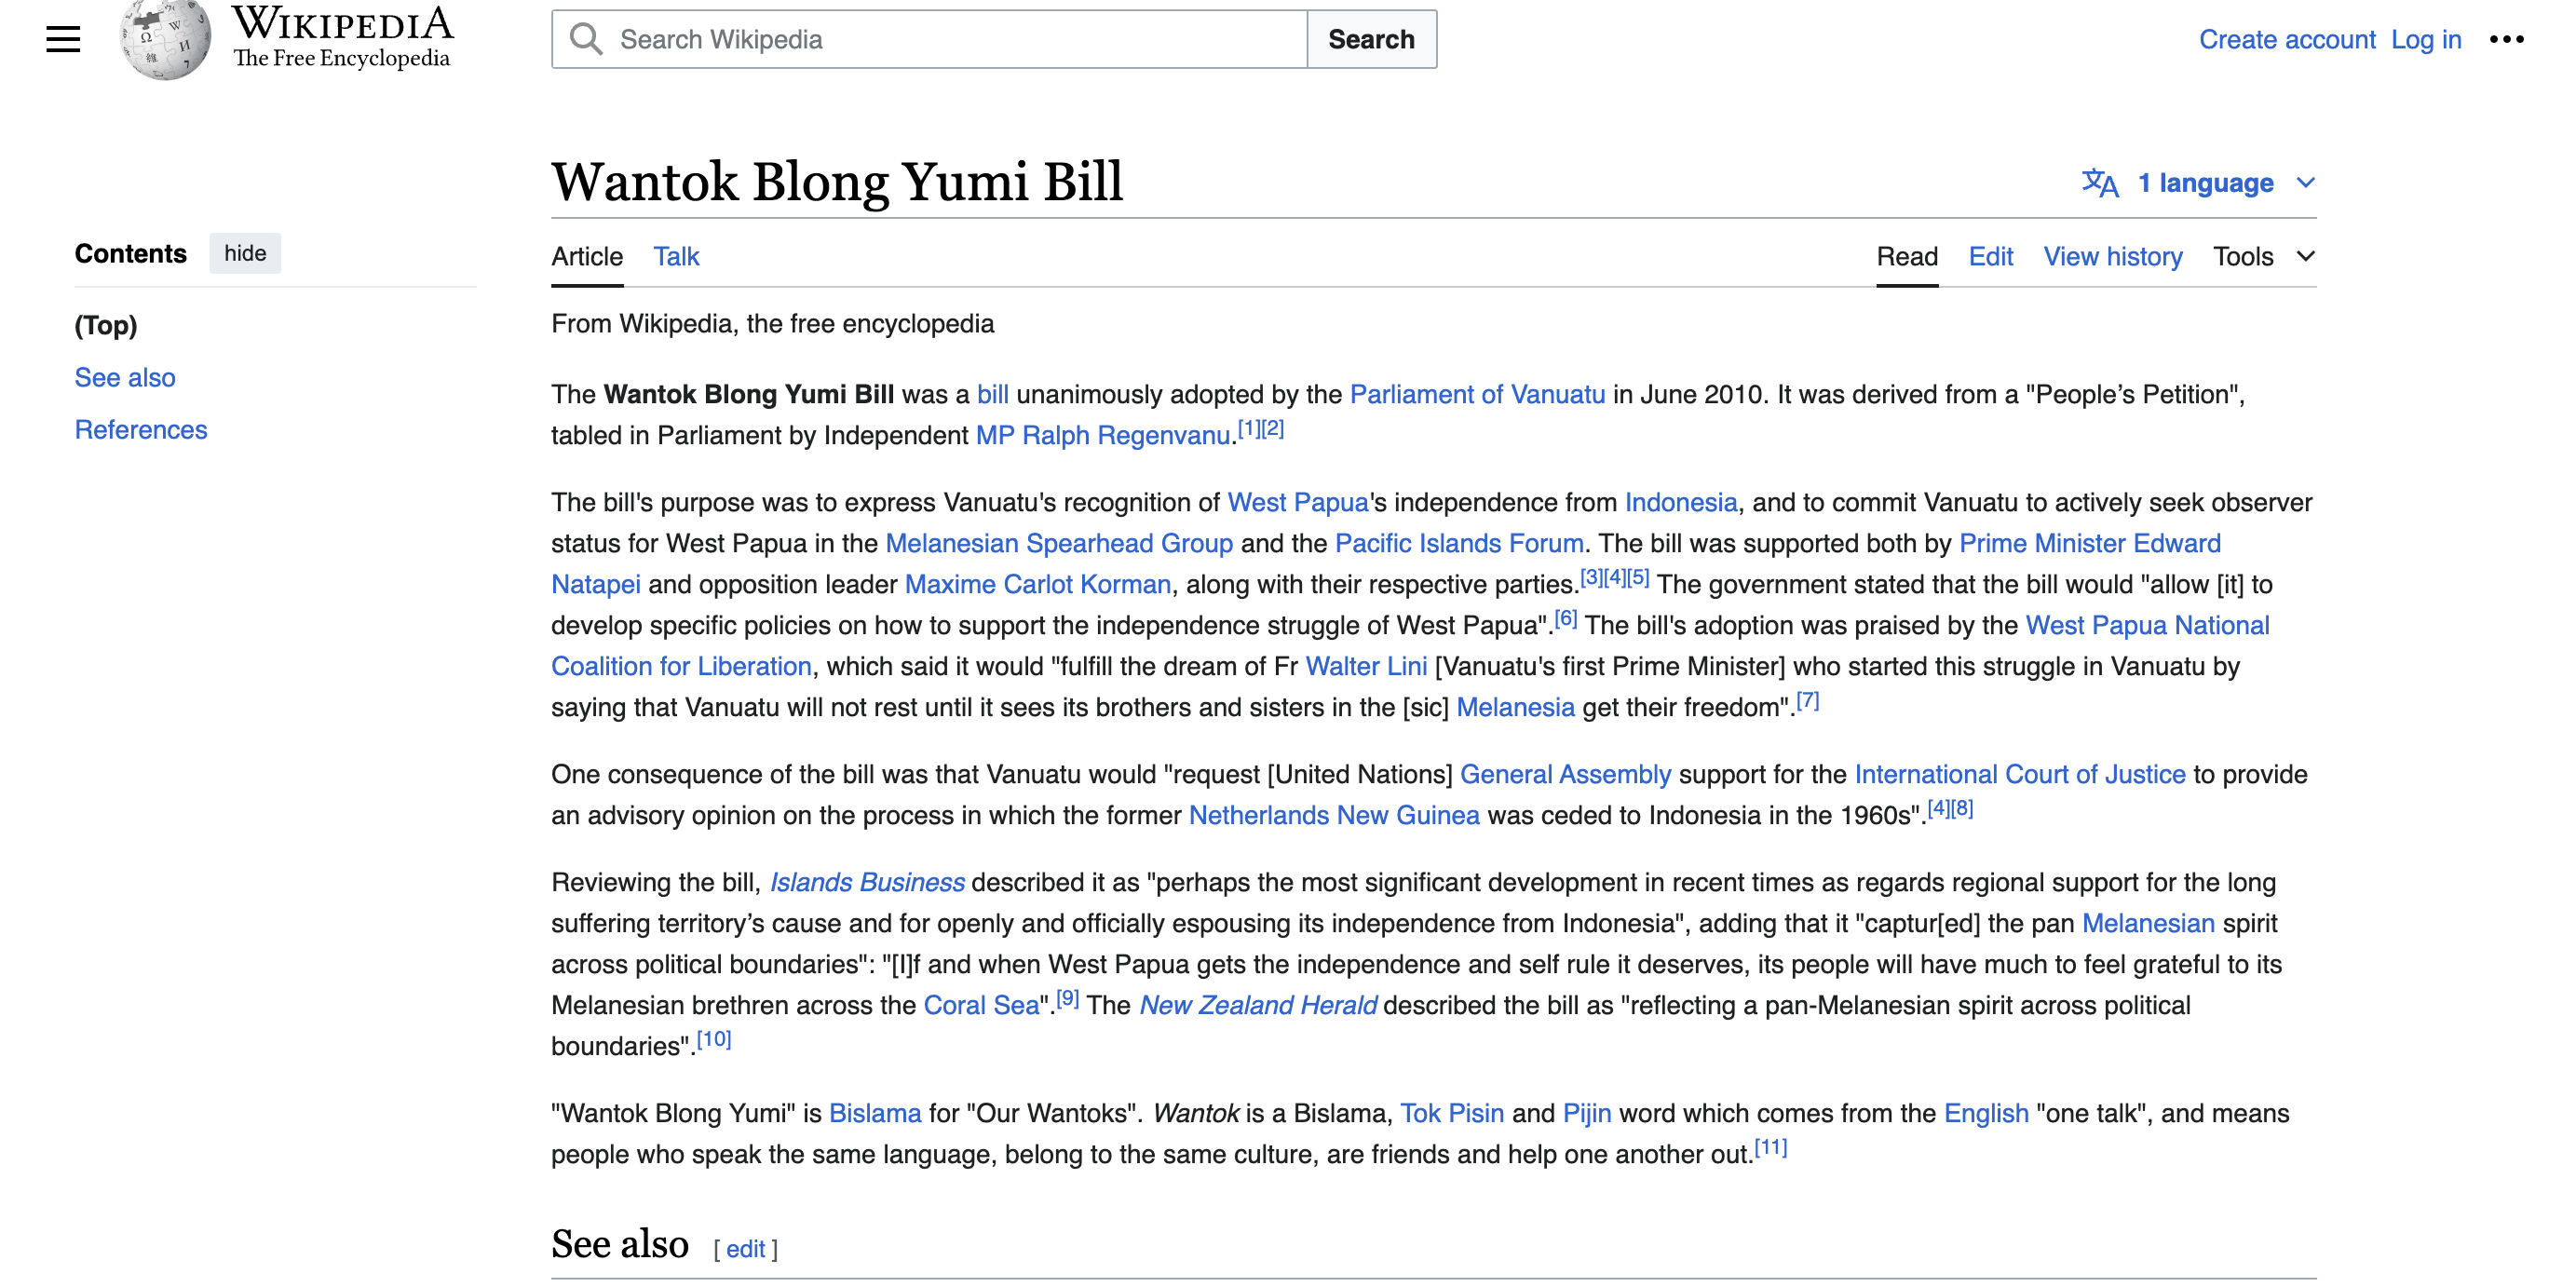 The Wantok Blong Yumi Bill was a bill unanimously adopted by the Parliament of Vanuatu in June 2010